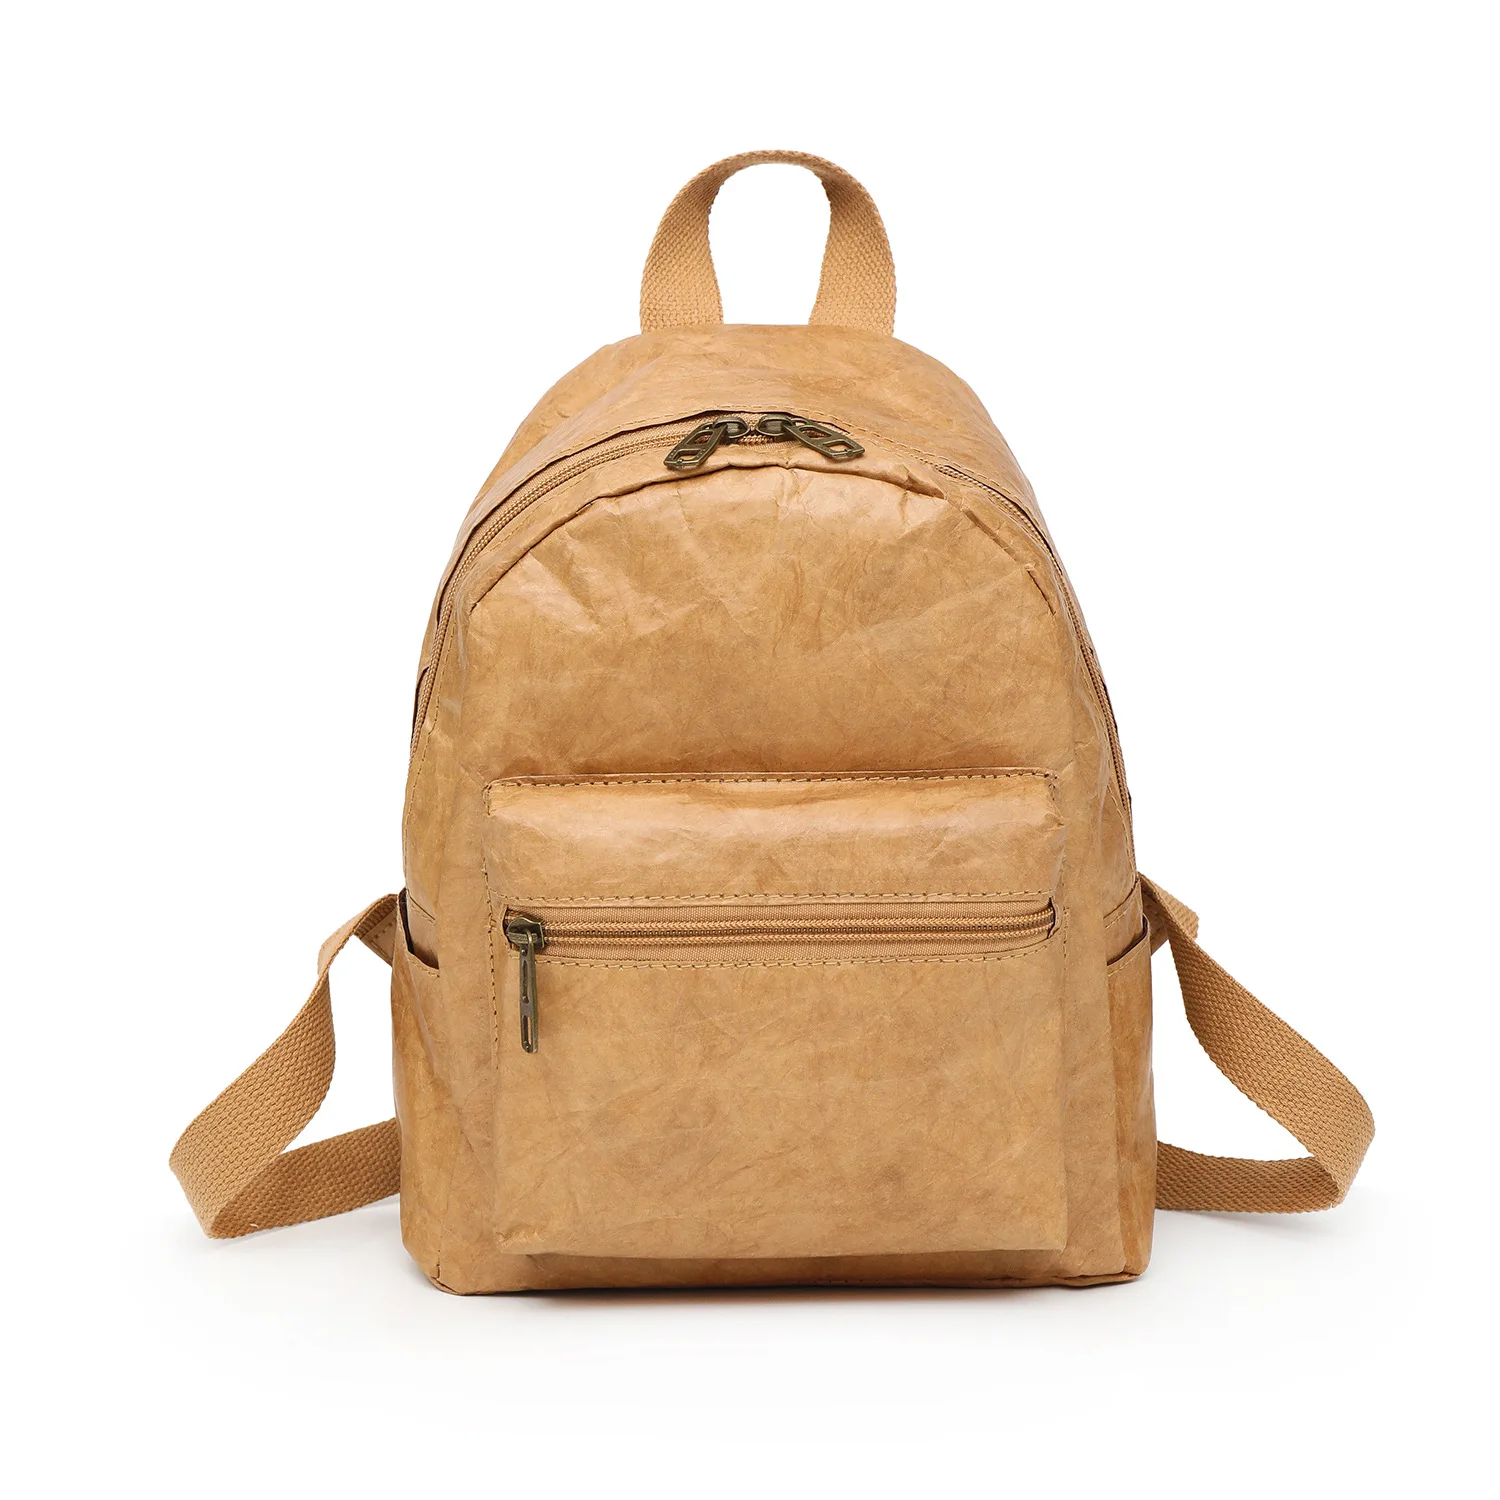 

PUBGS Unisex Backpack 2019 NEW Kraft Paper Bag Foldable Decompressed Washable Tear-resistant Environmental-friendly Women & Male